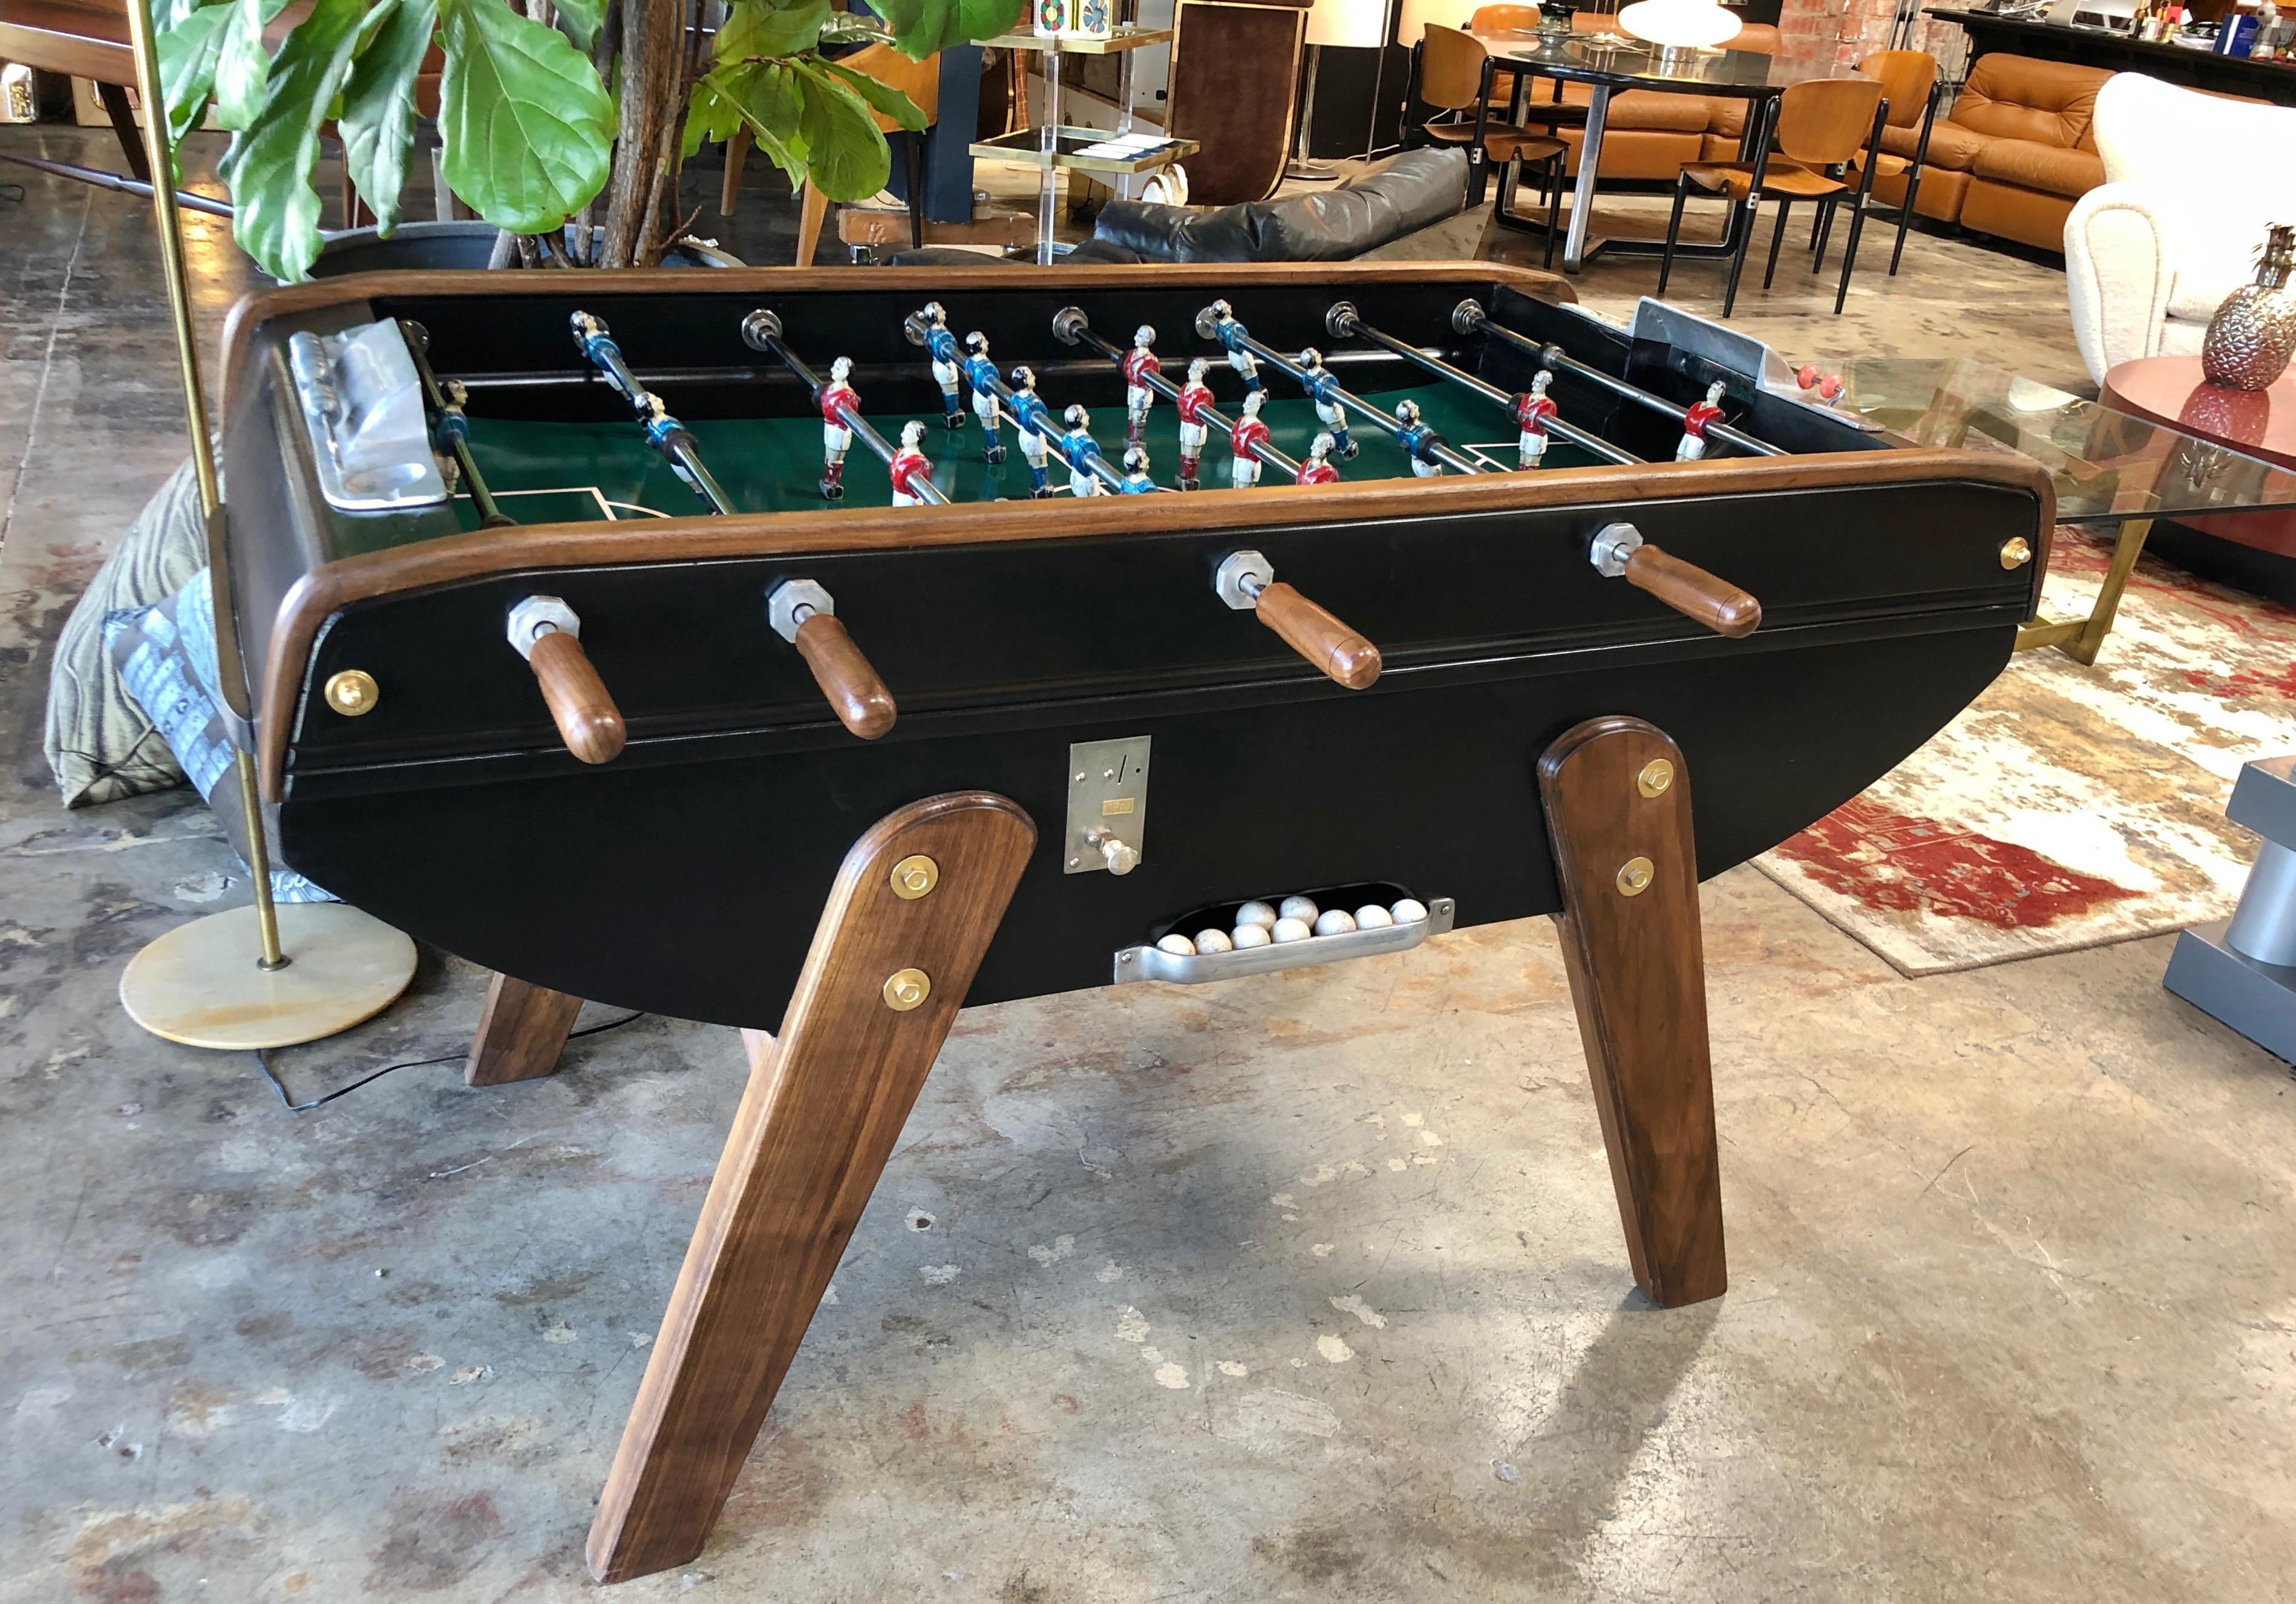 Midcentury French black and brown wood foosball table in walnut.
Our modern spin on an old game.